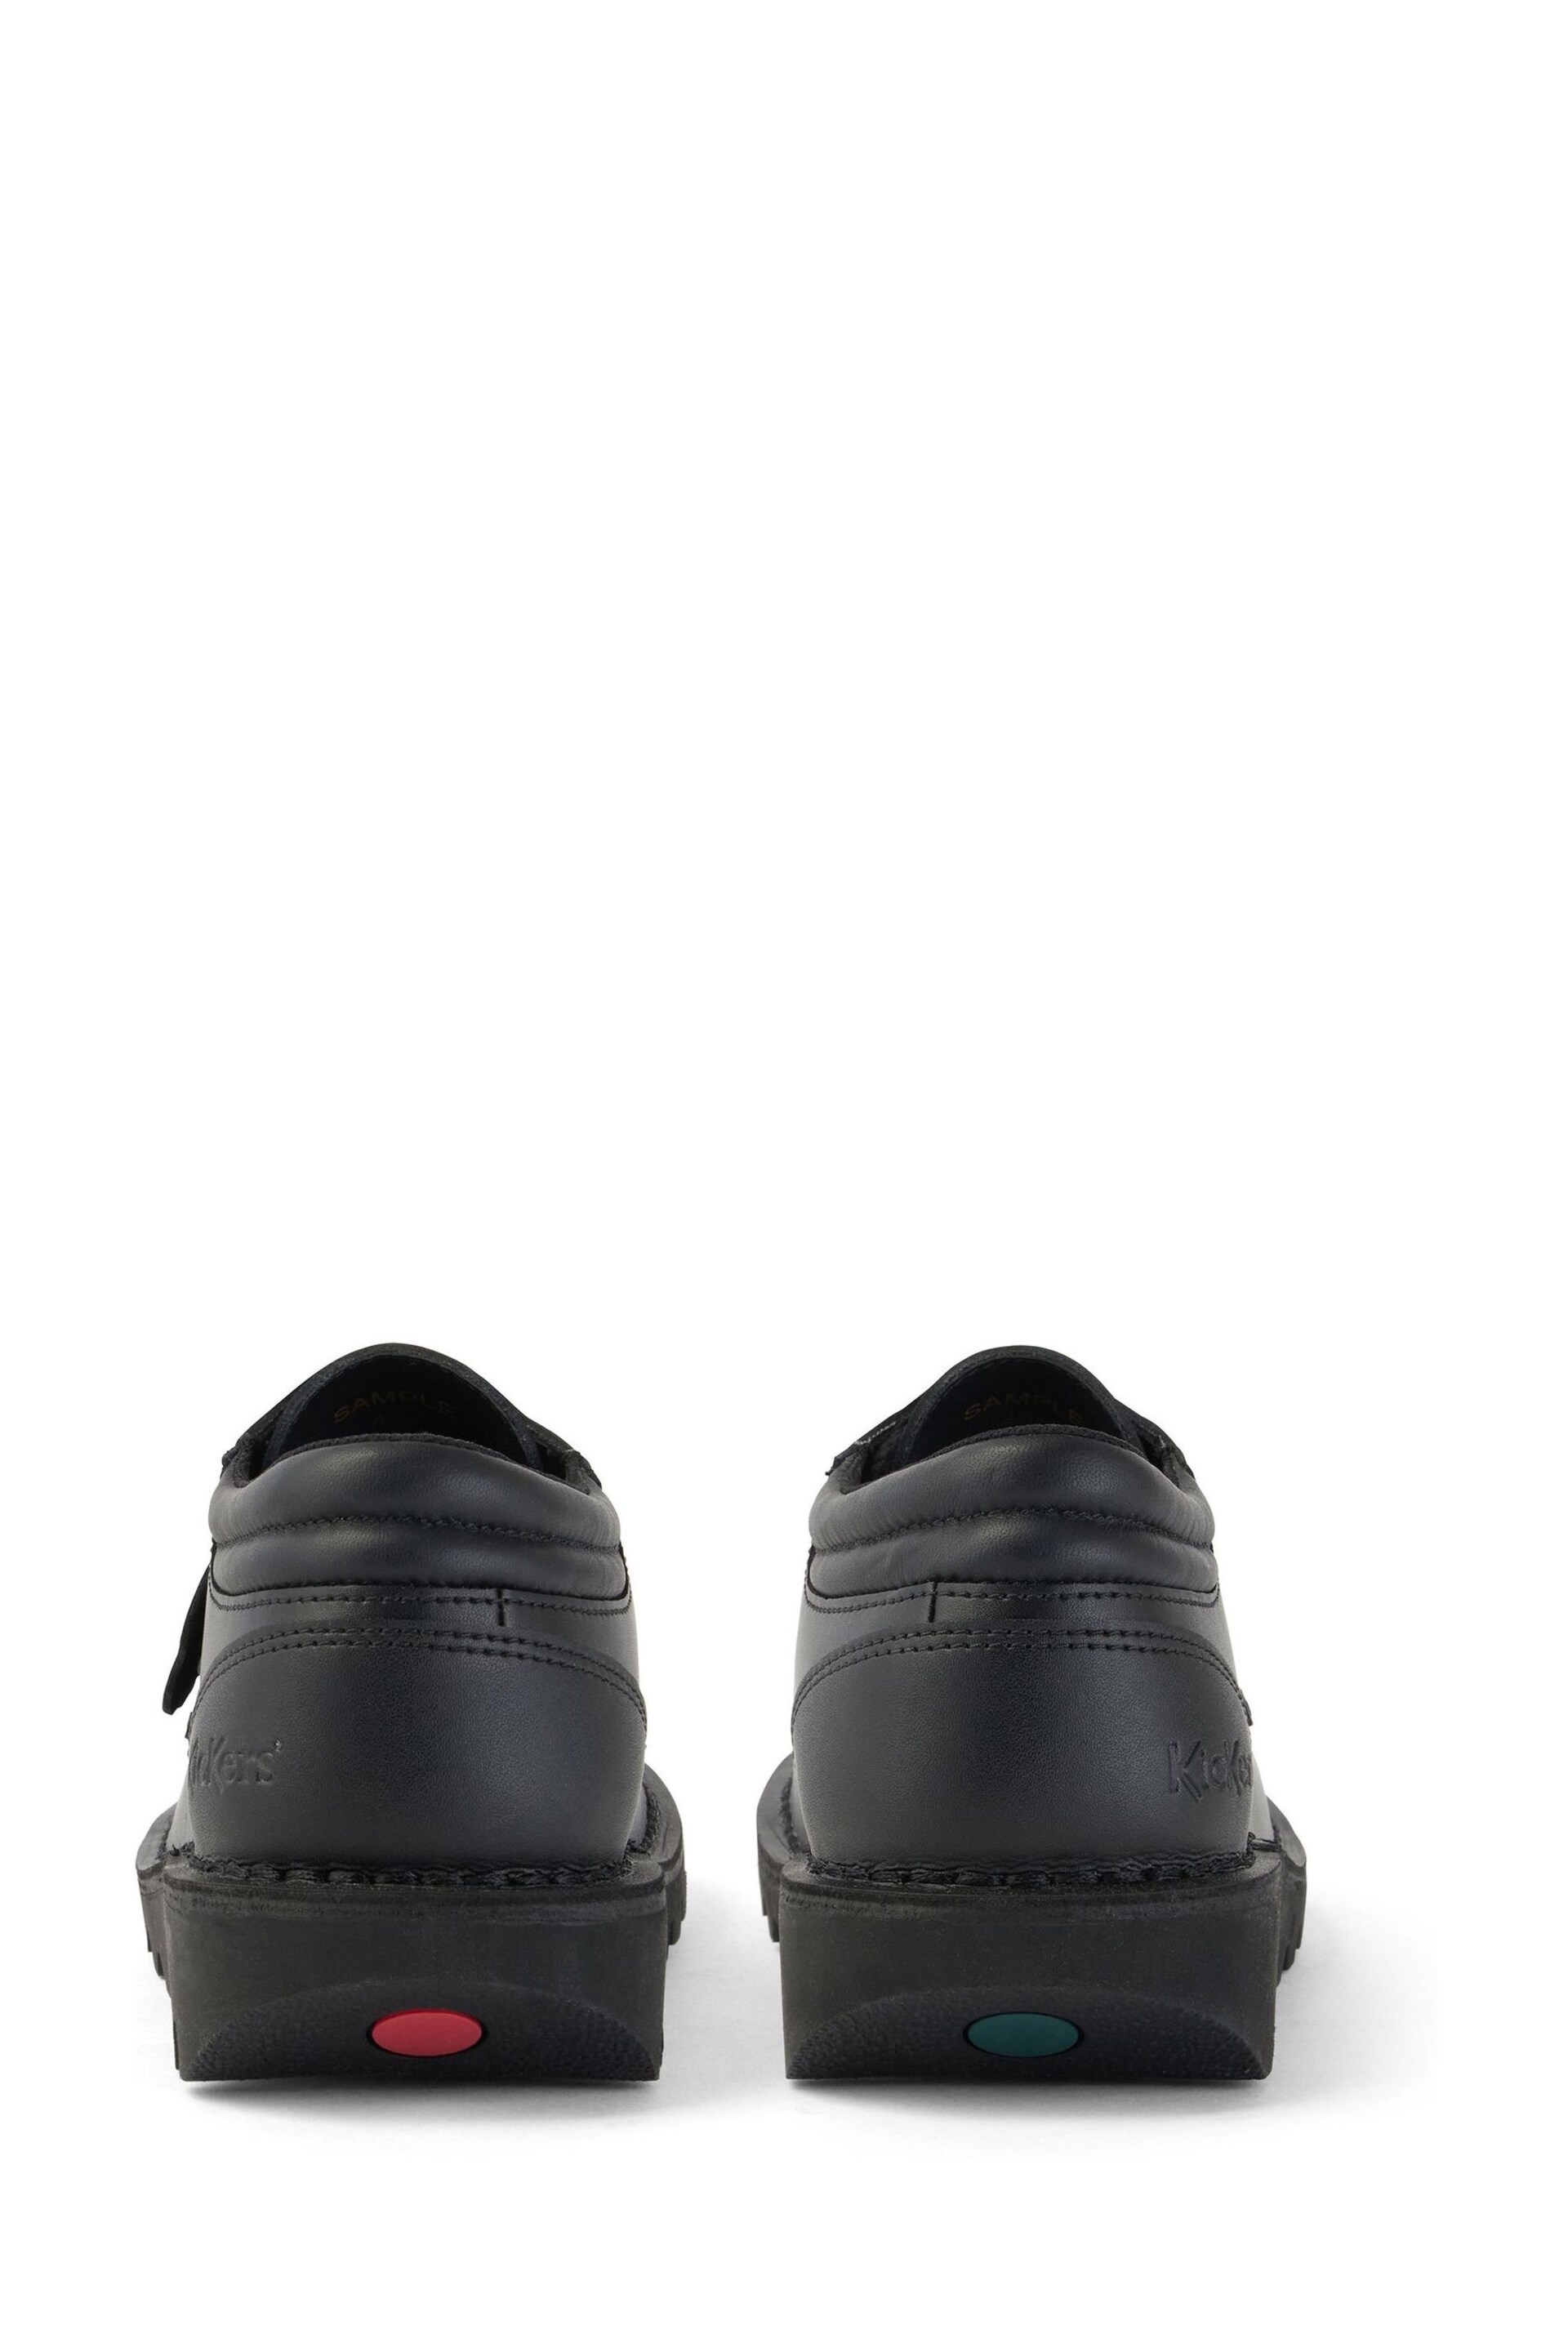 Kickers Kick Lo Padded Leather Shoes - Image 4 of 6